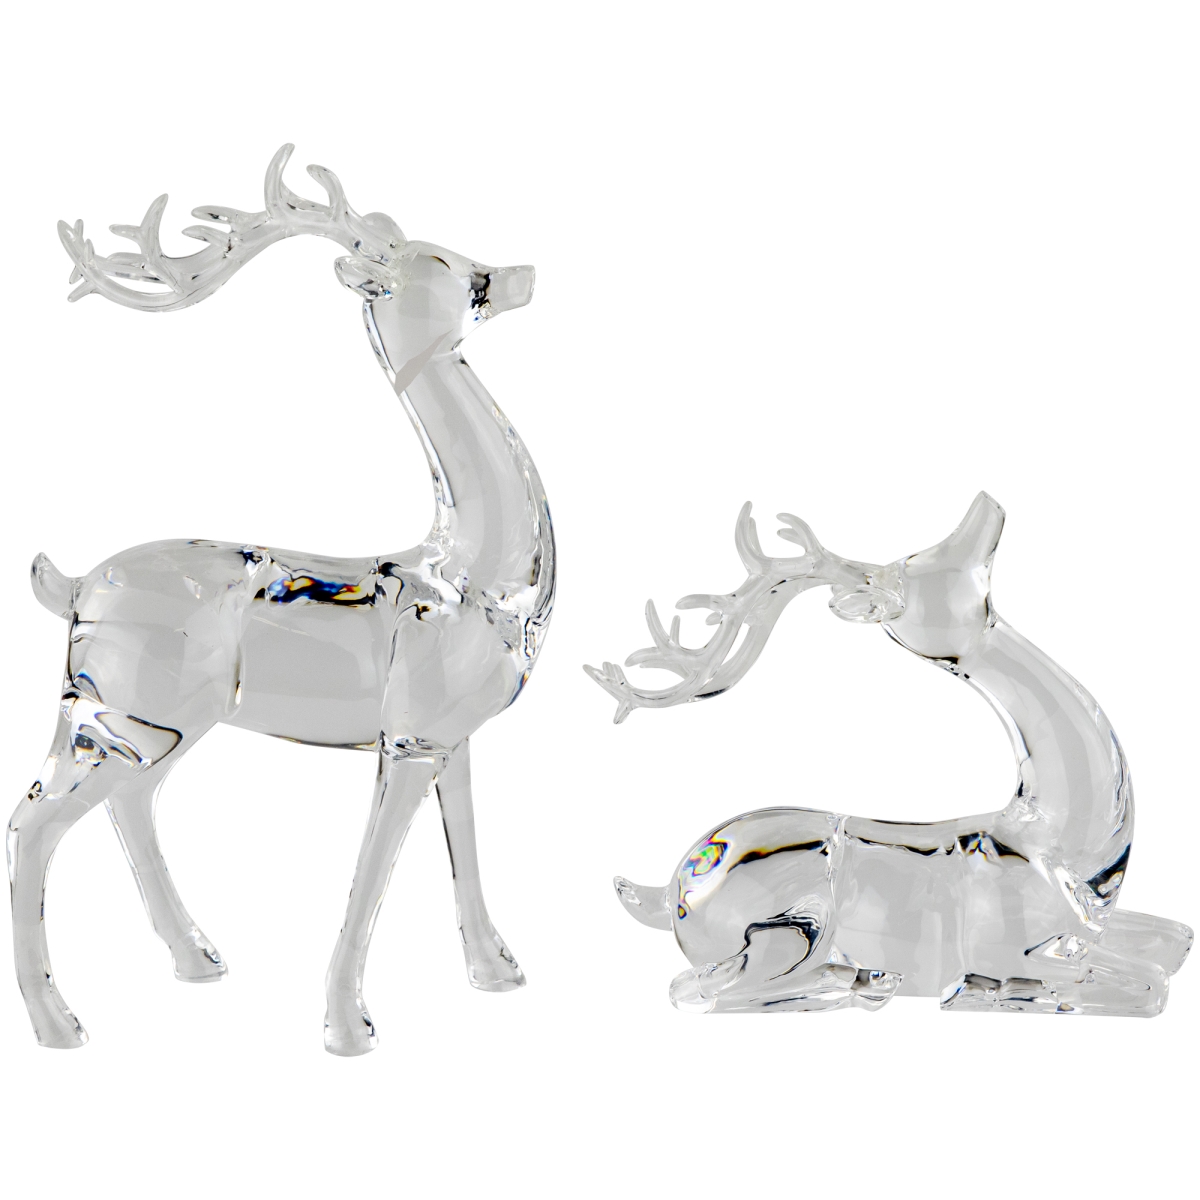 Picture of Northlight 35690052 Kneeling & Standing Reindeer Acrylic Christmas Decorations - Set of 2